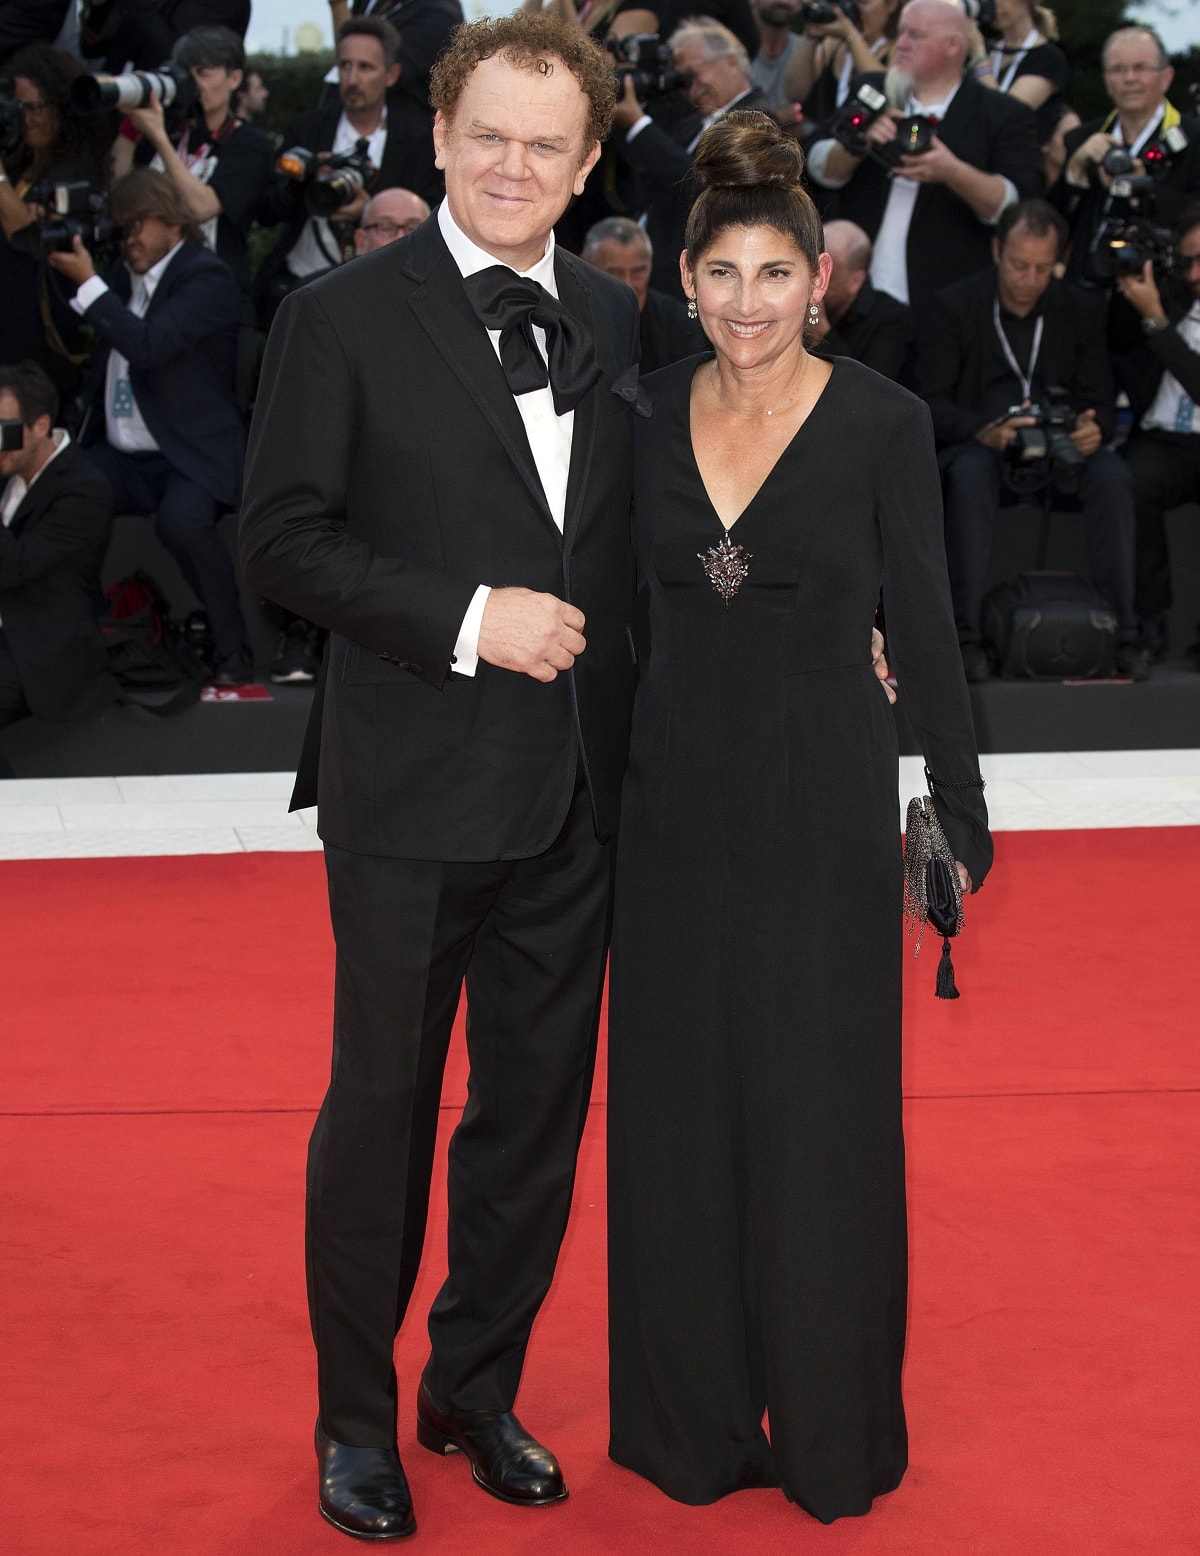 John C. Reilly and Alison Dickey looking elegant at the premiere of The Sisters Brothers during the 75th Venice Film Festival